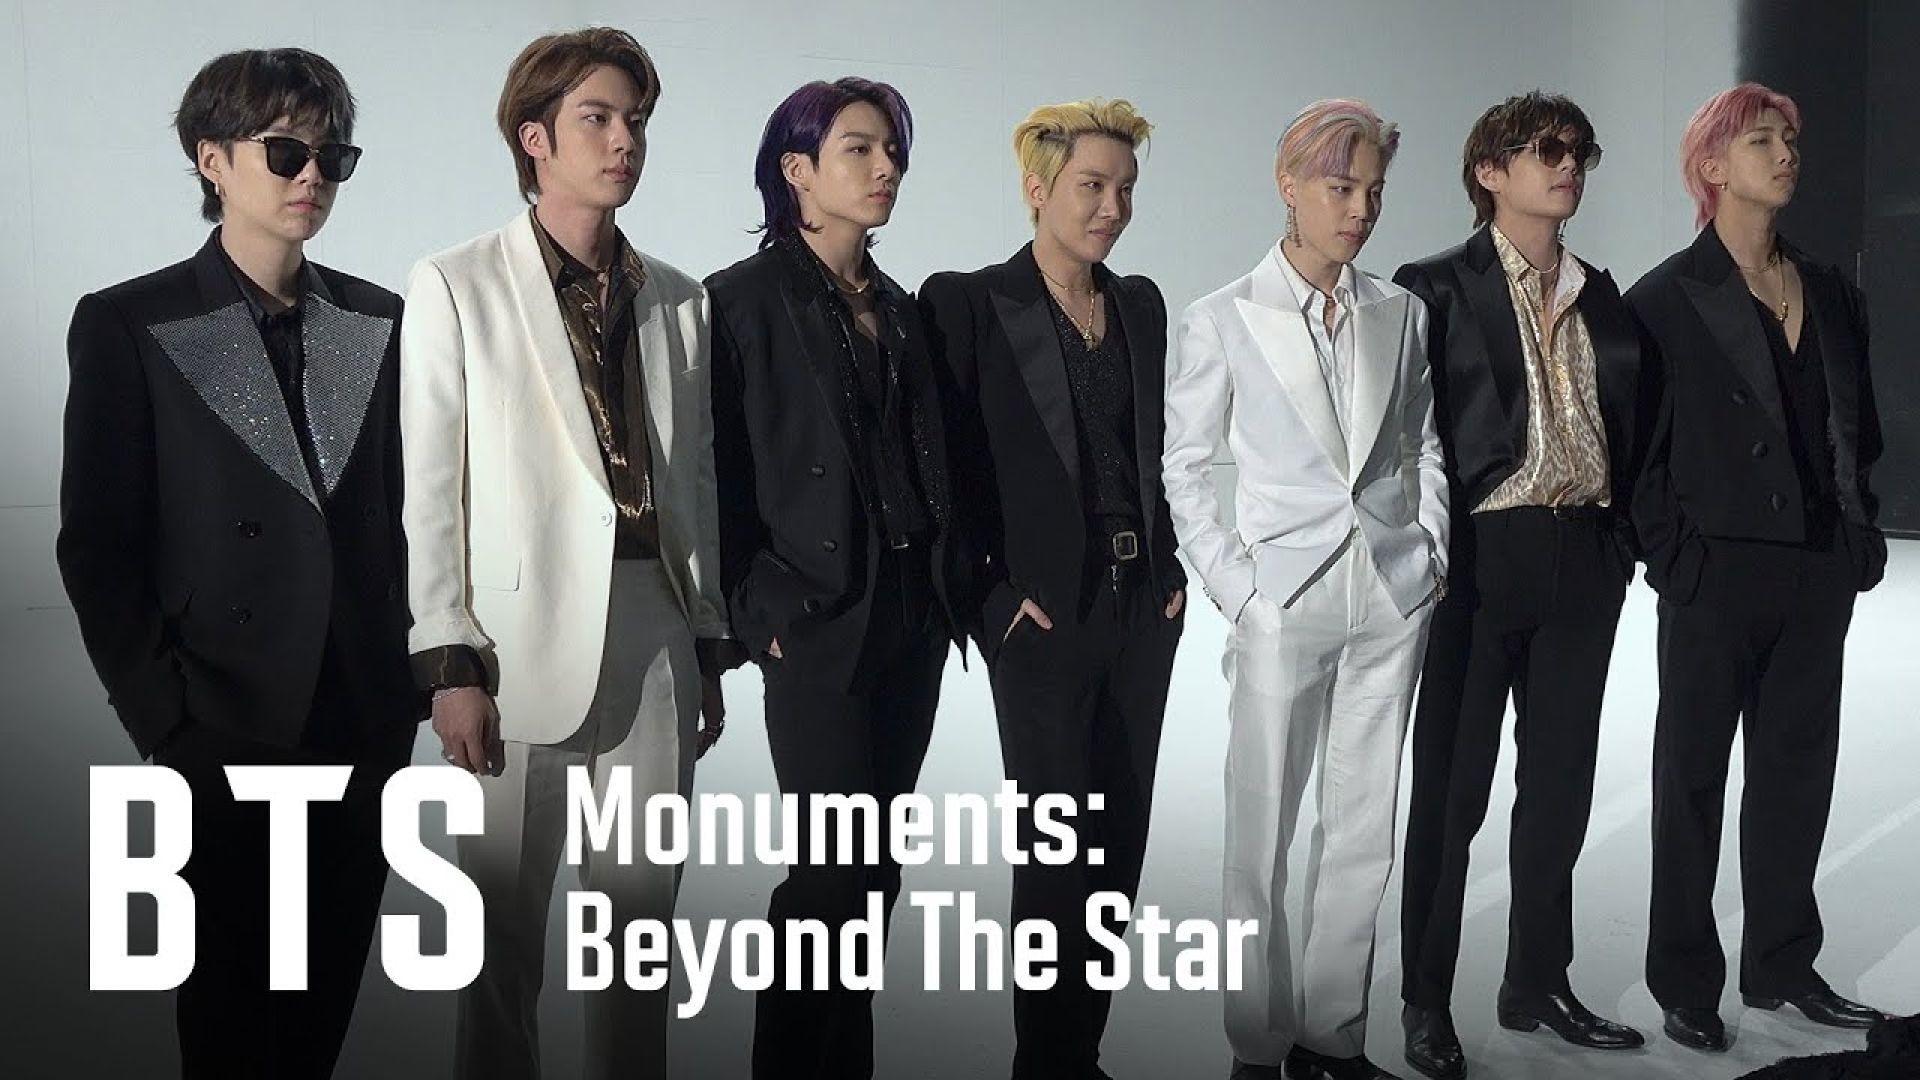 ⁣ep  1 - The Beginning  BTS Monuments: Beyond The Star